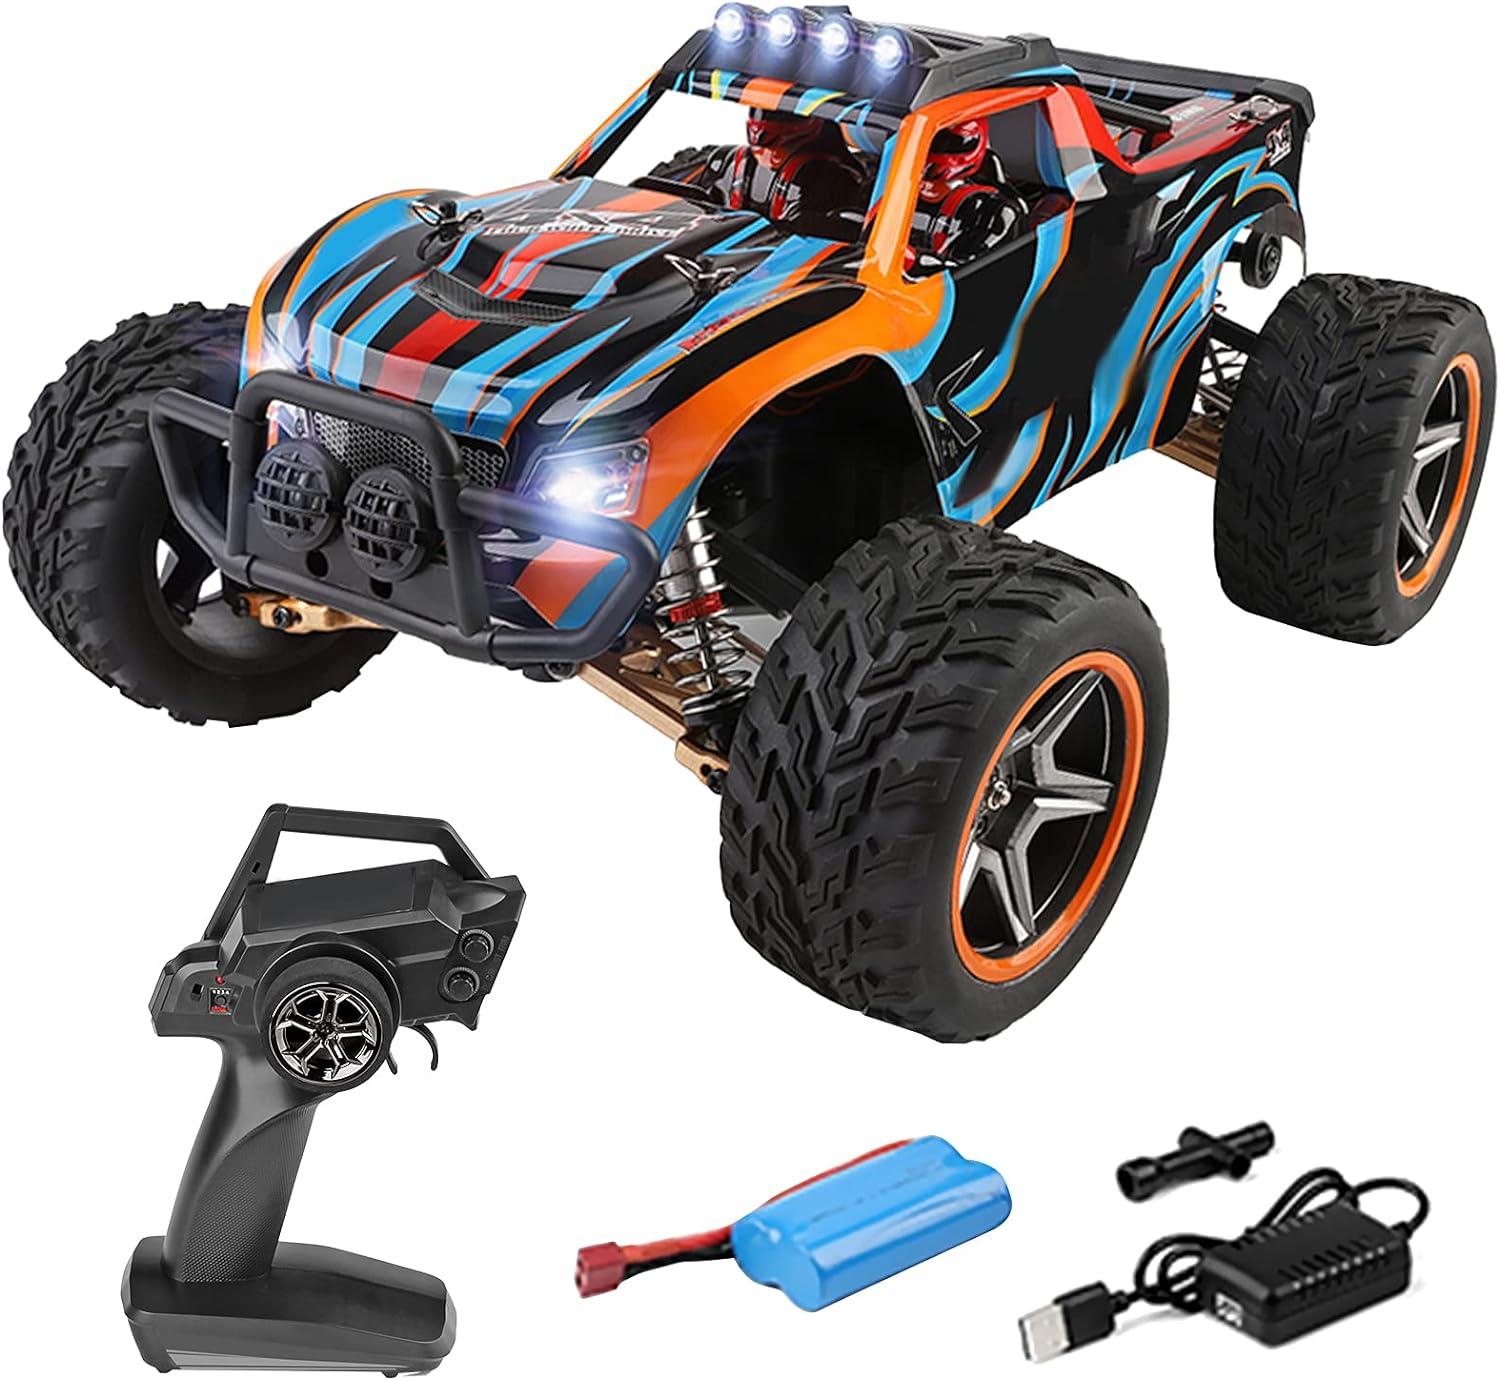 Large Electric Rc Cars: Benefits of Owning a Large Electric RC Car